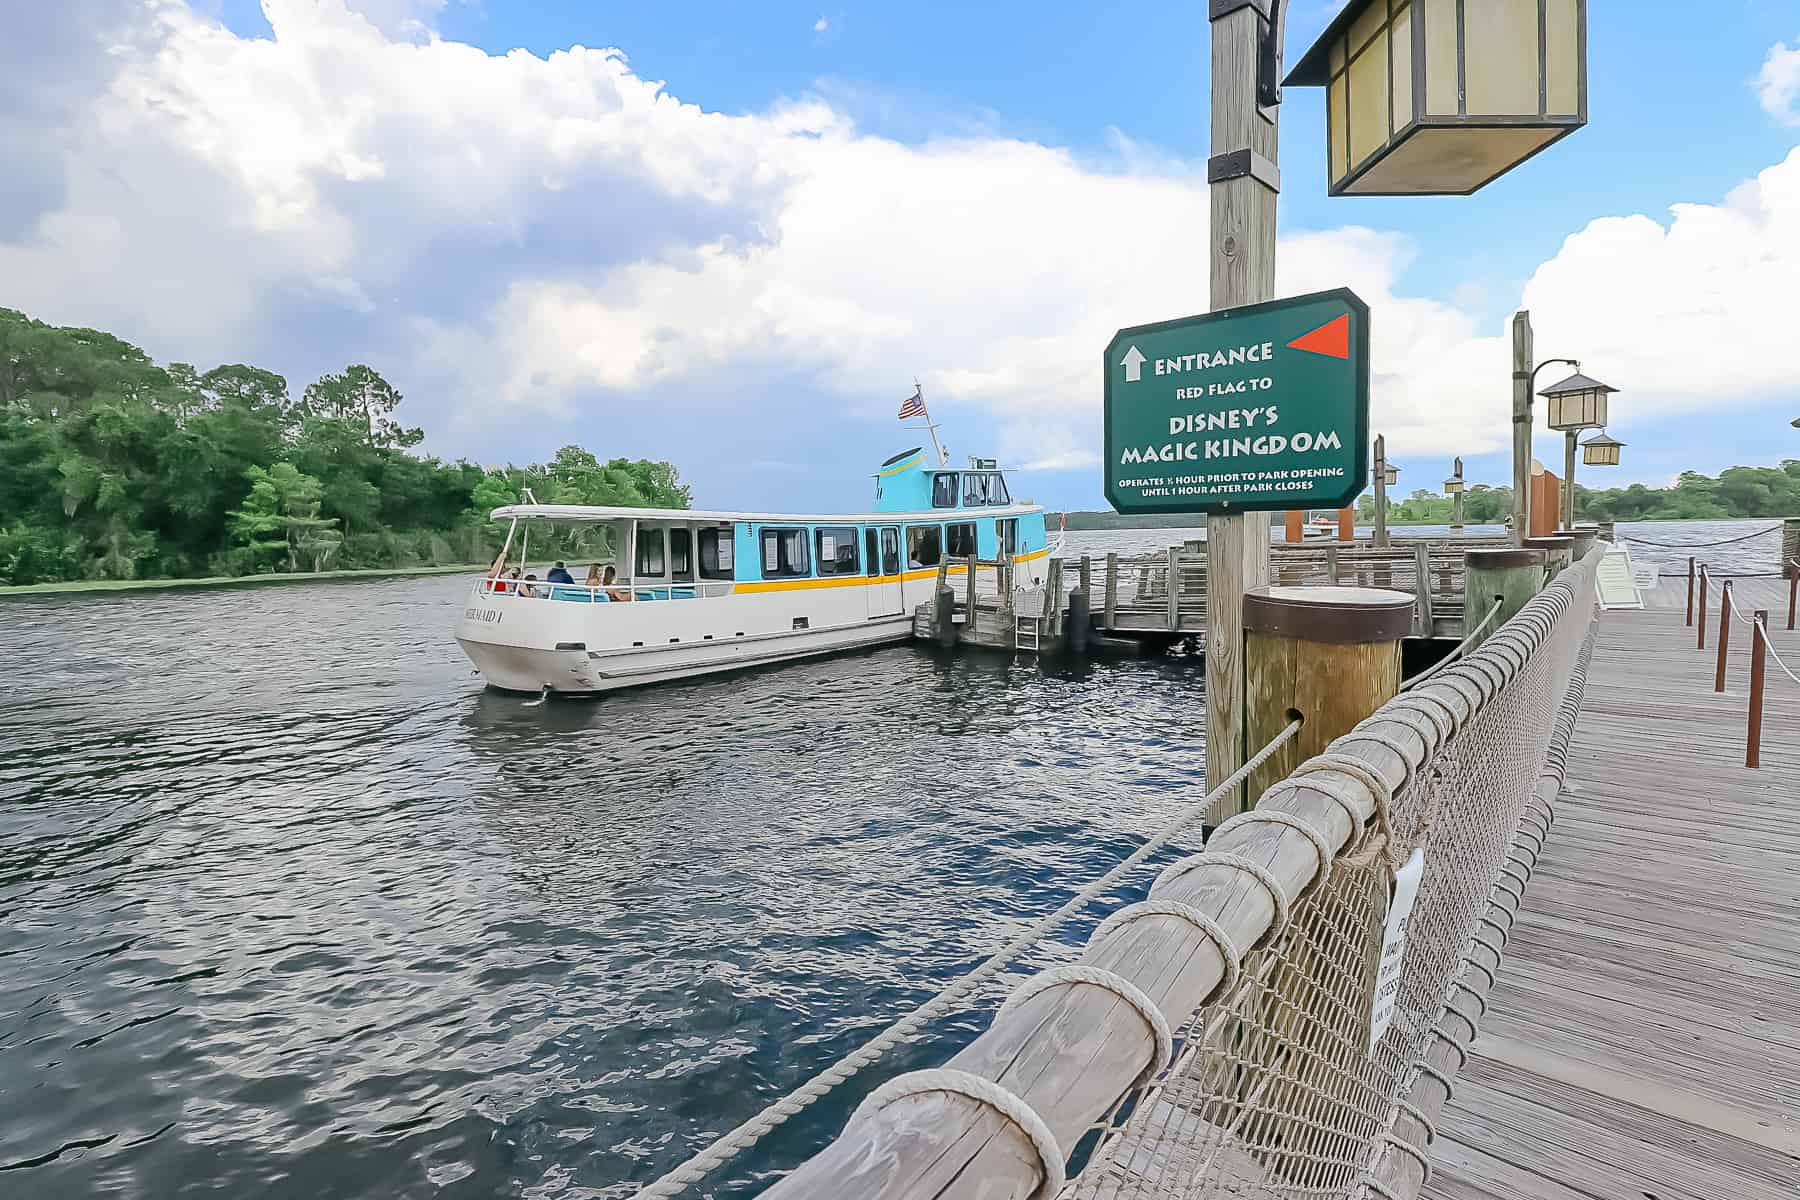 the boat dock and entrance to the red flag boat service at the Wilderness Lodge 